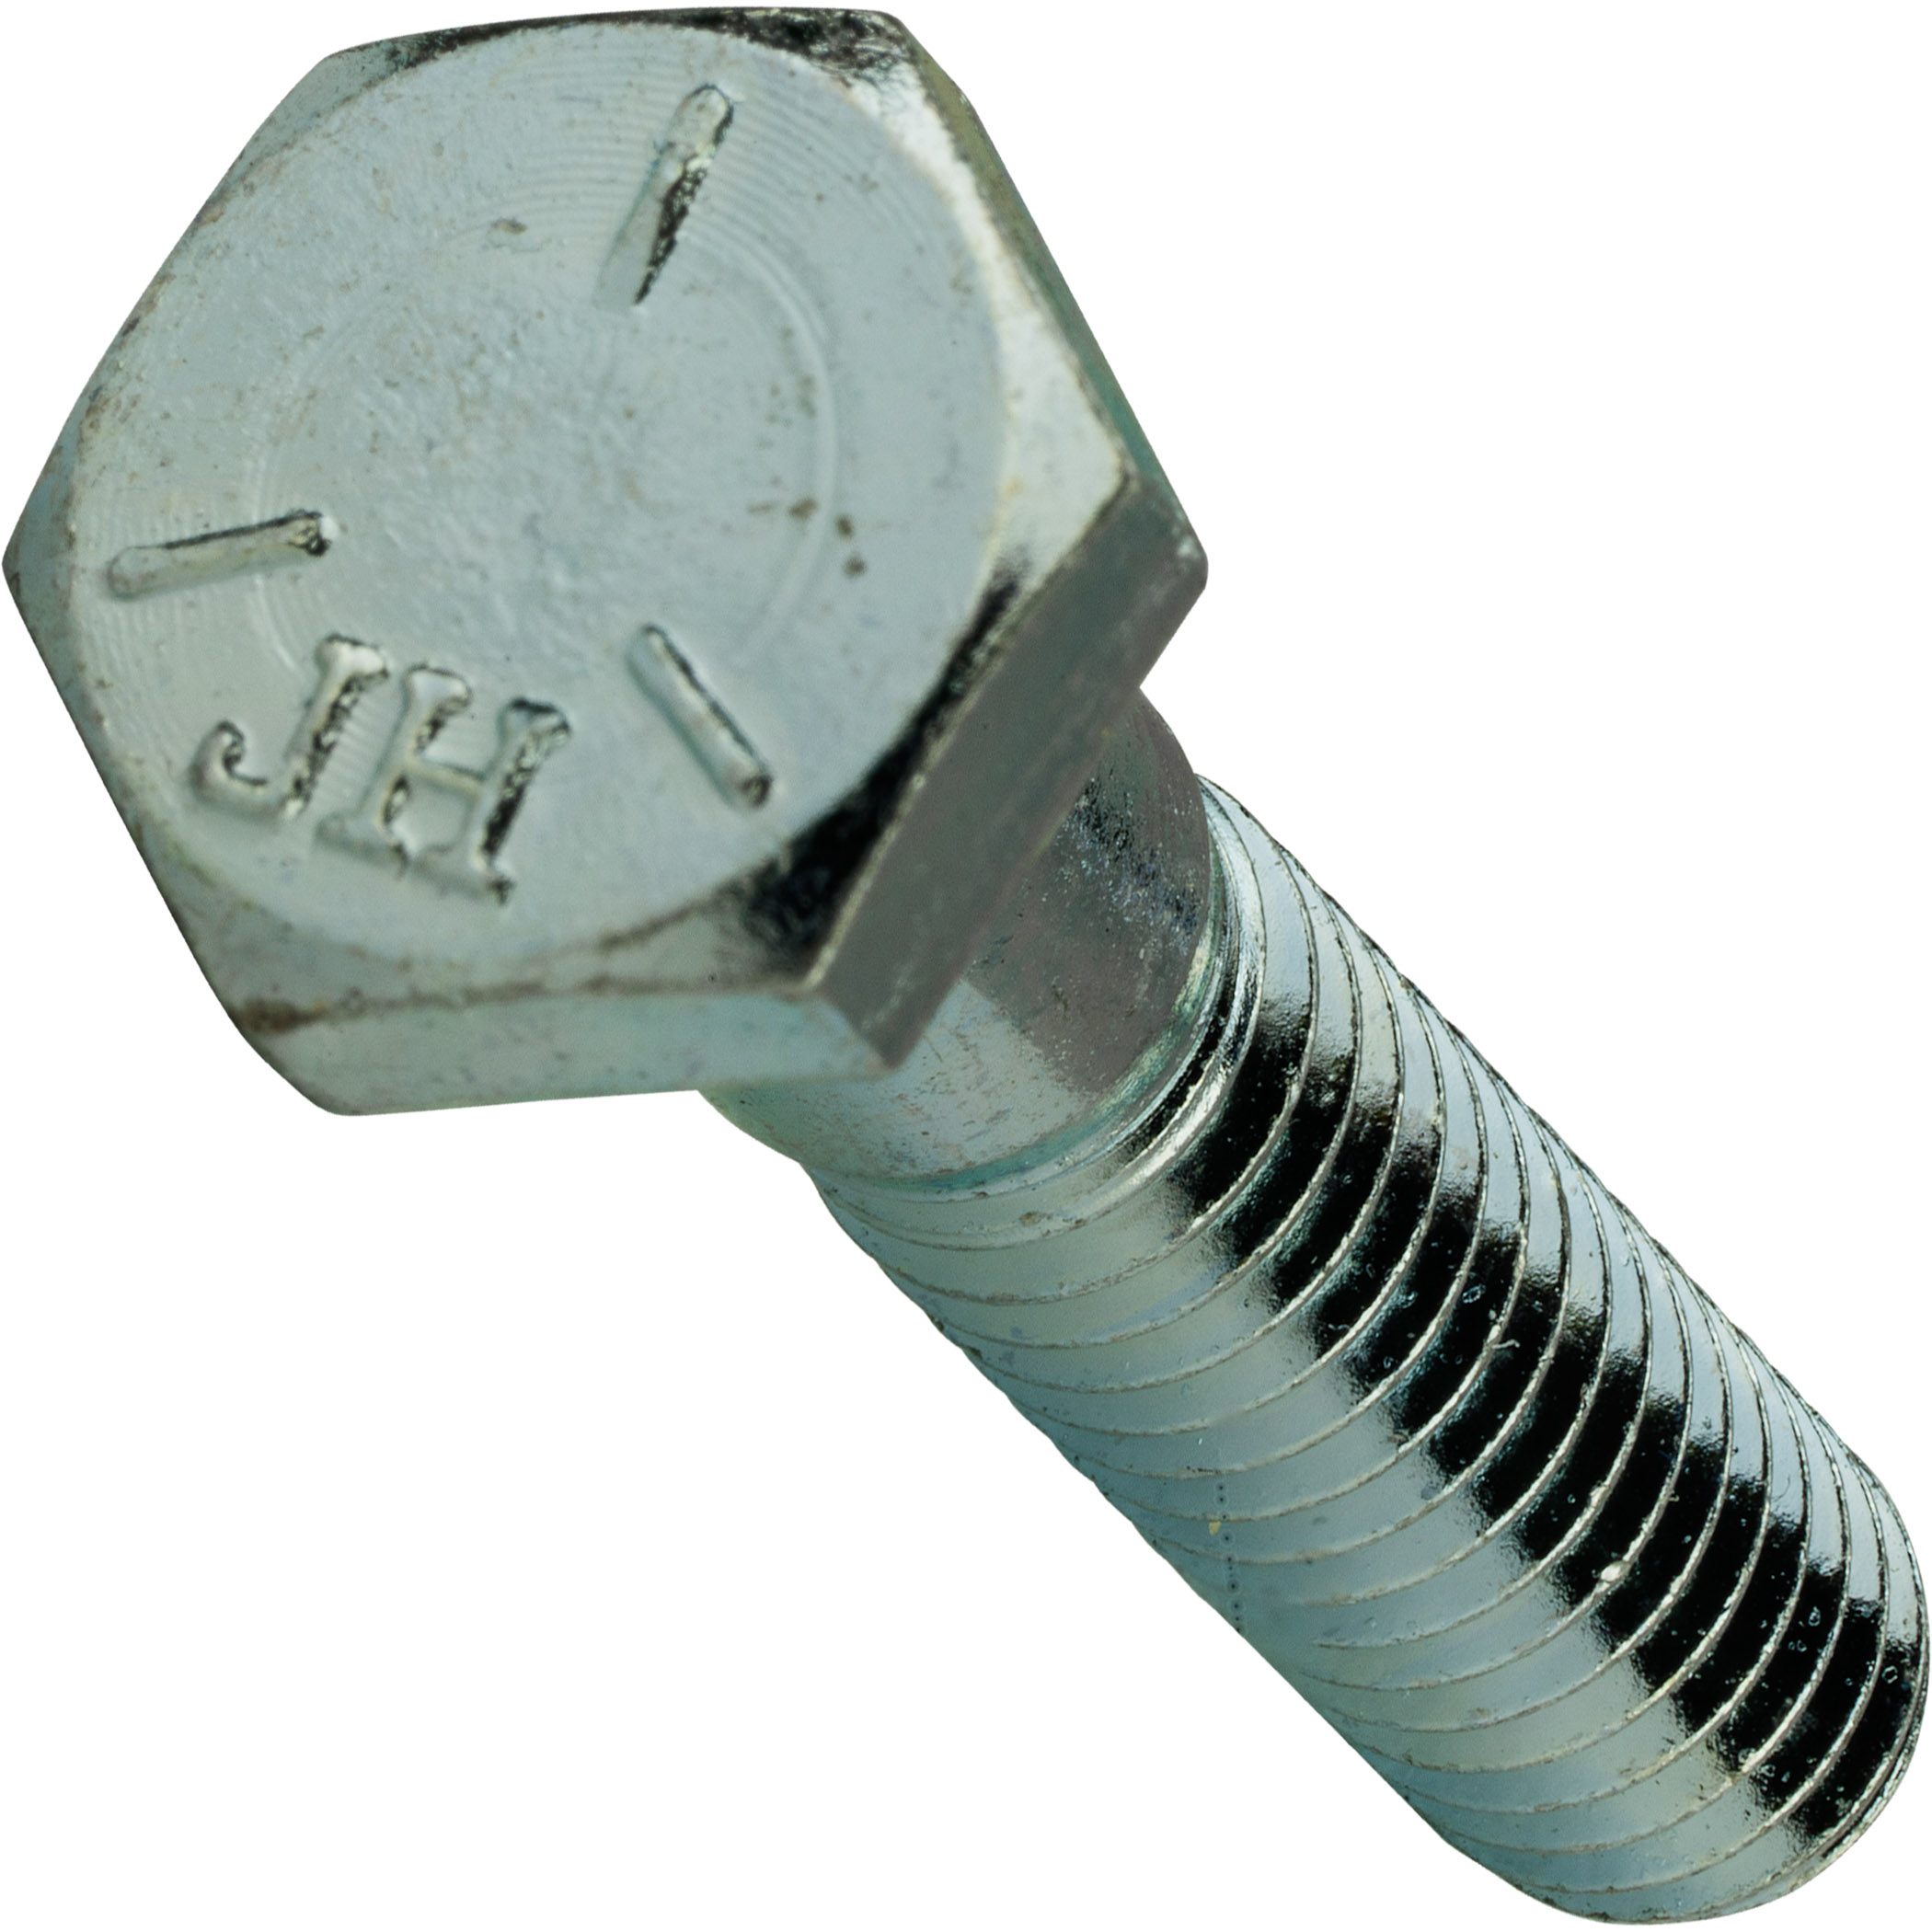 USS Details about   3/8" x 16 thread x 5" hex bolts zinc plated  LOT of 50  USA shipping $9.00 